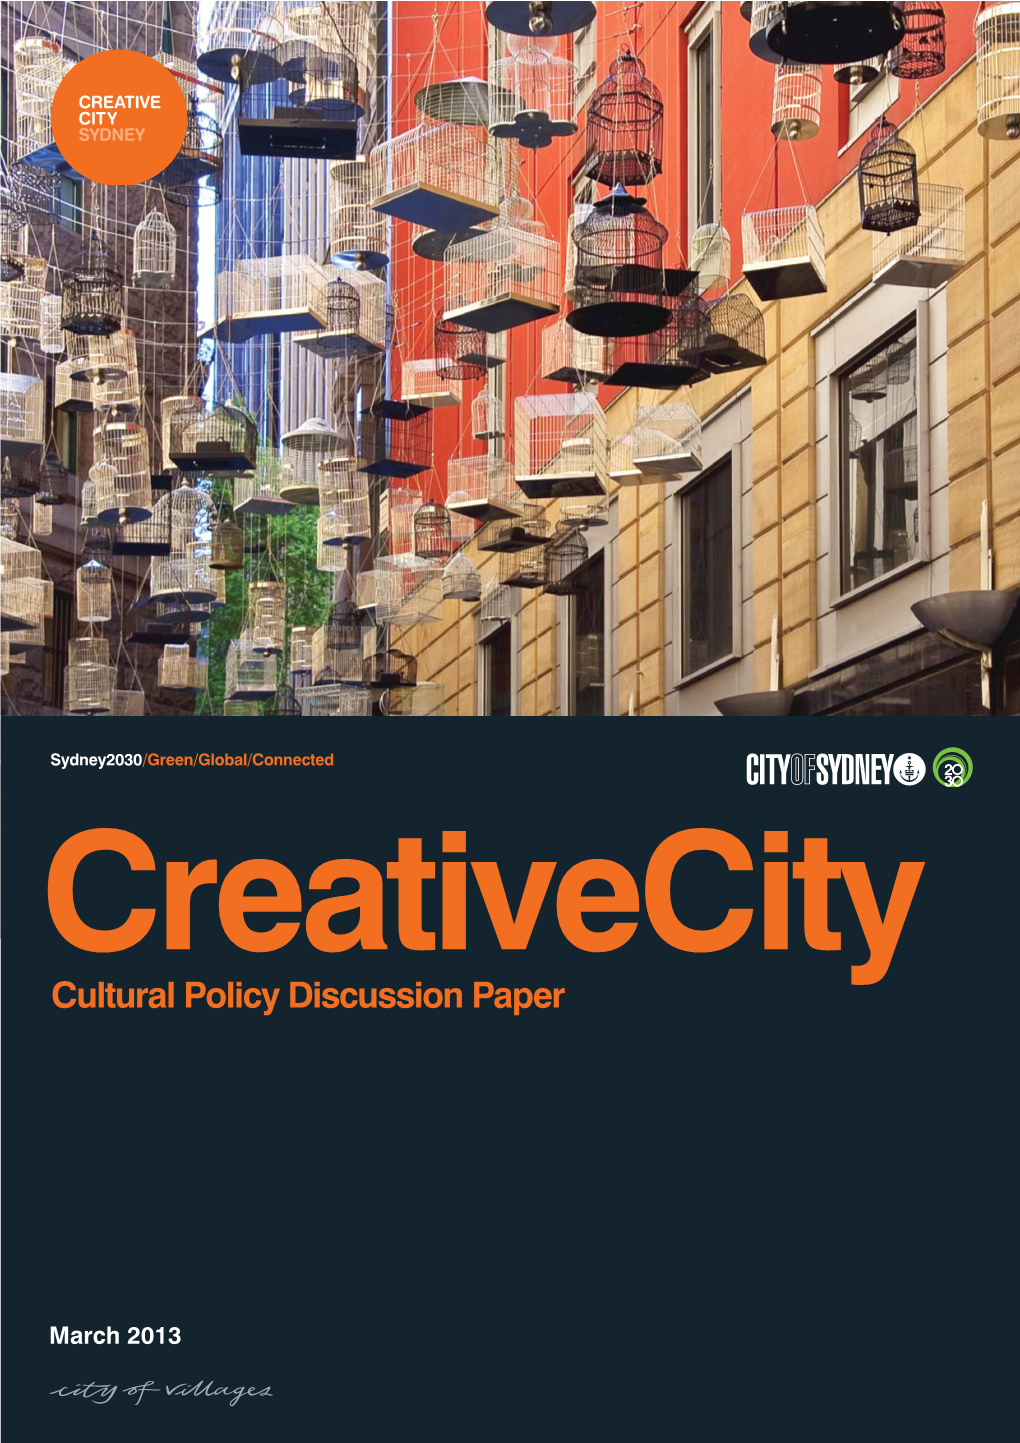 Cultural Policy Discussion Paper